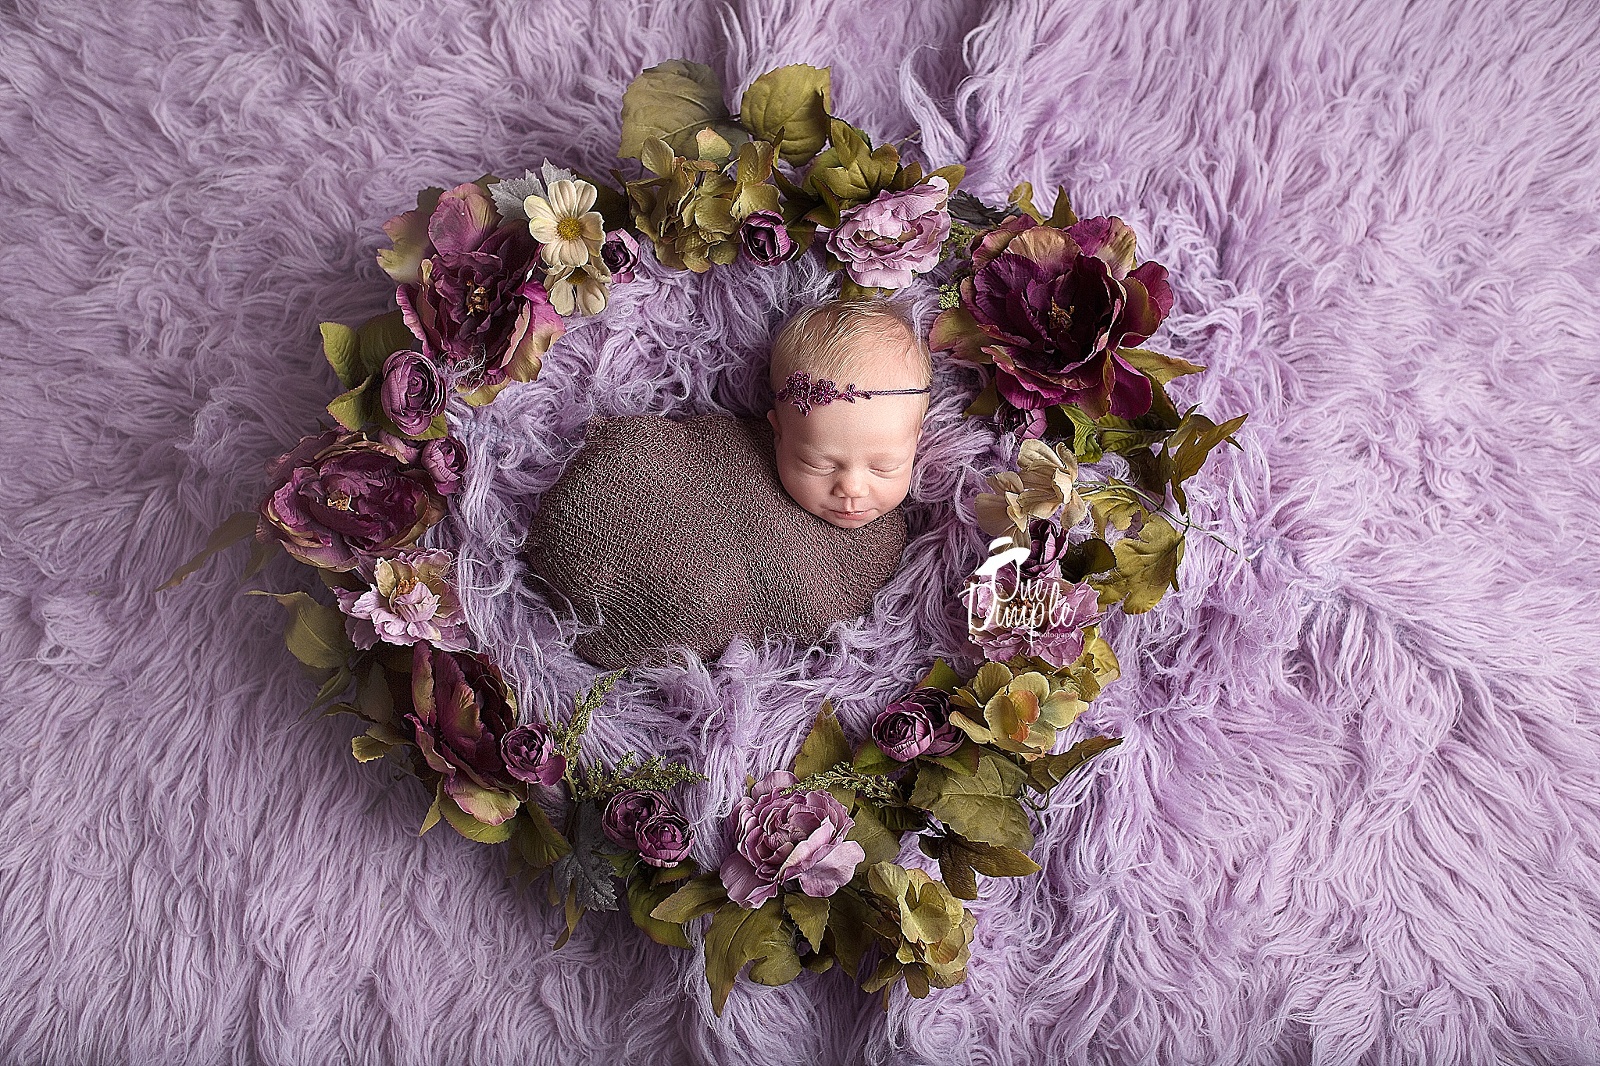 Newborn Baby surrounded by purple floral flowers